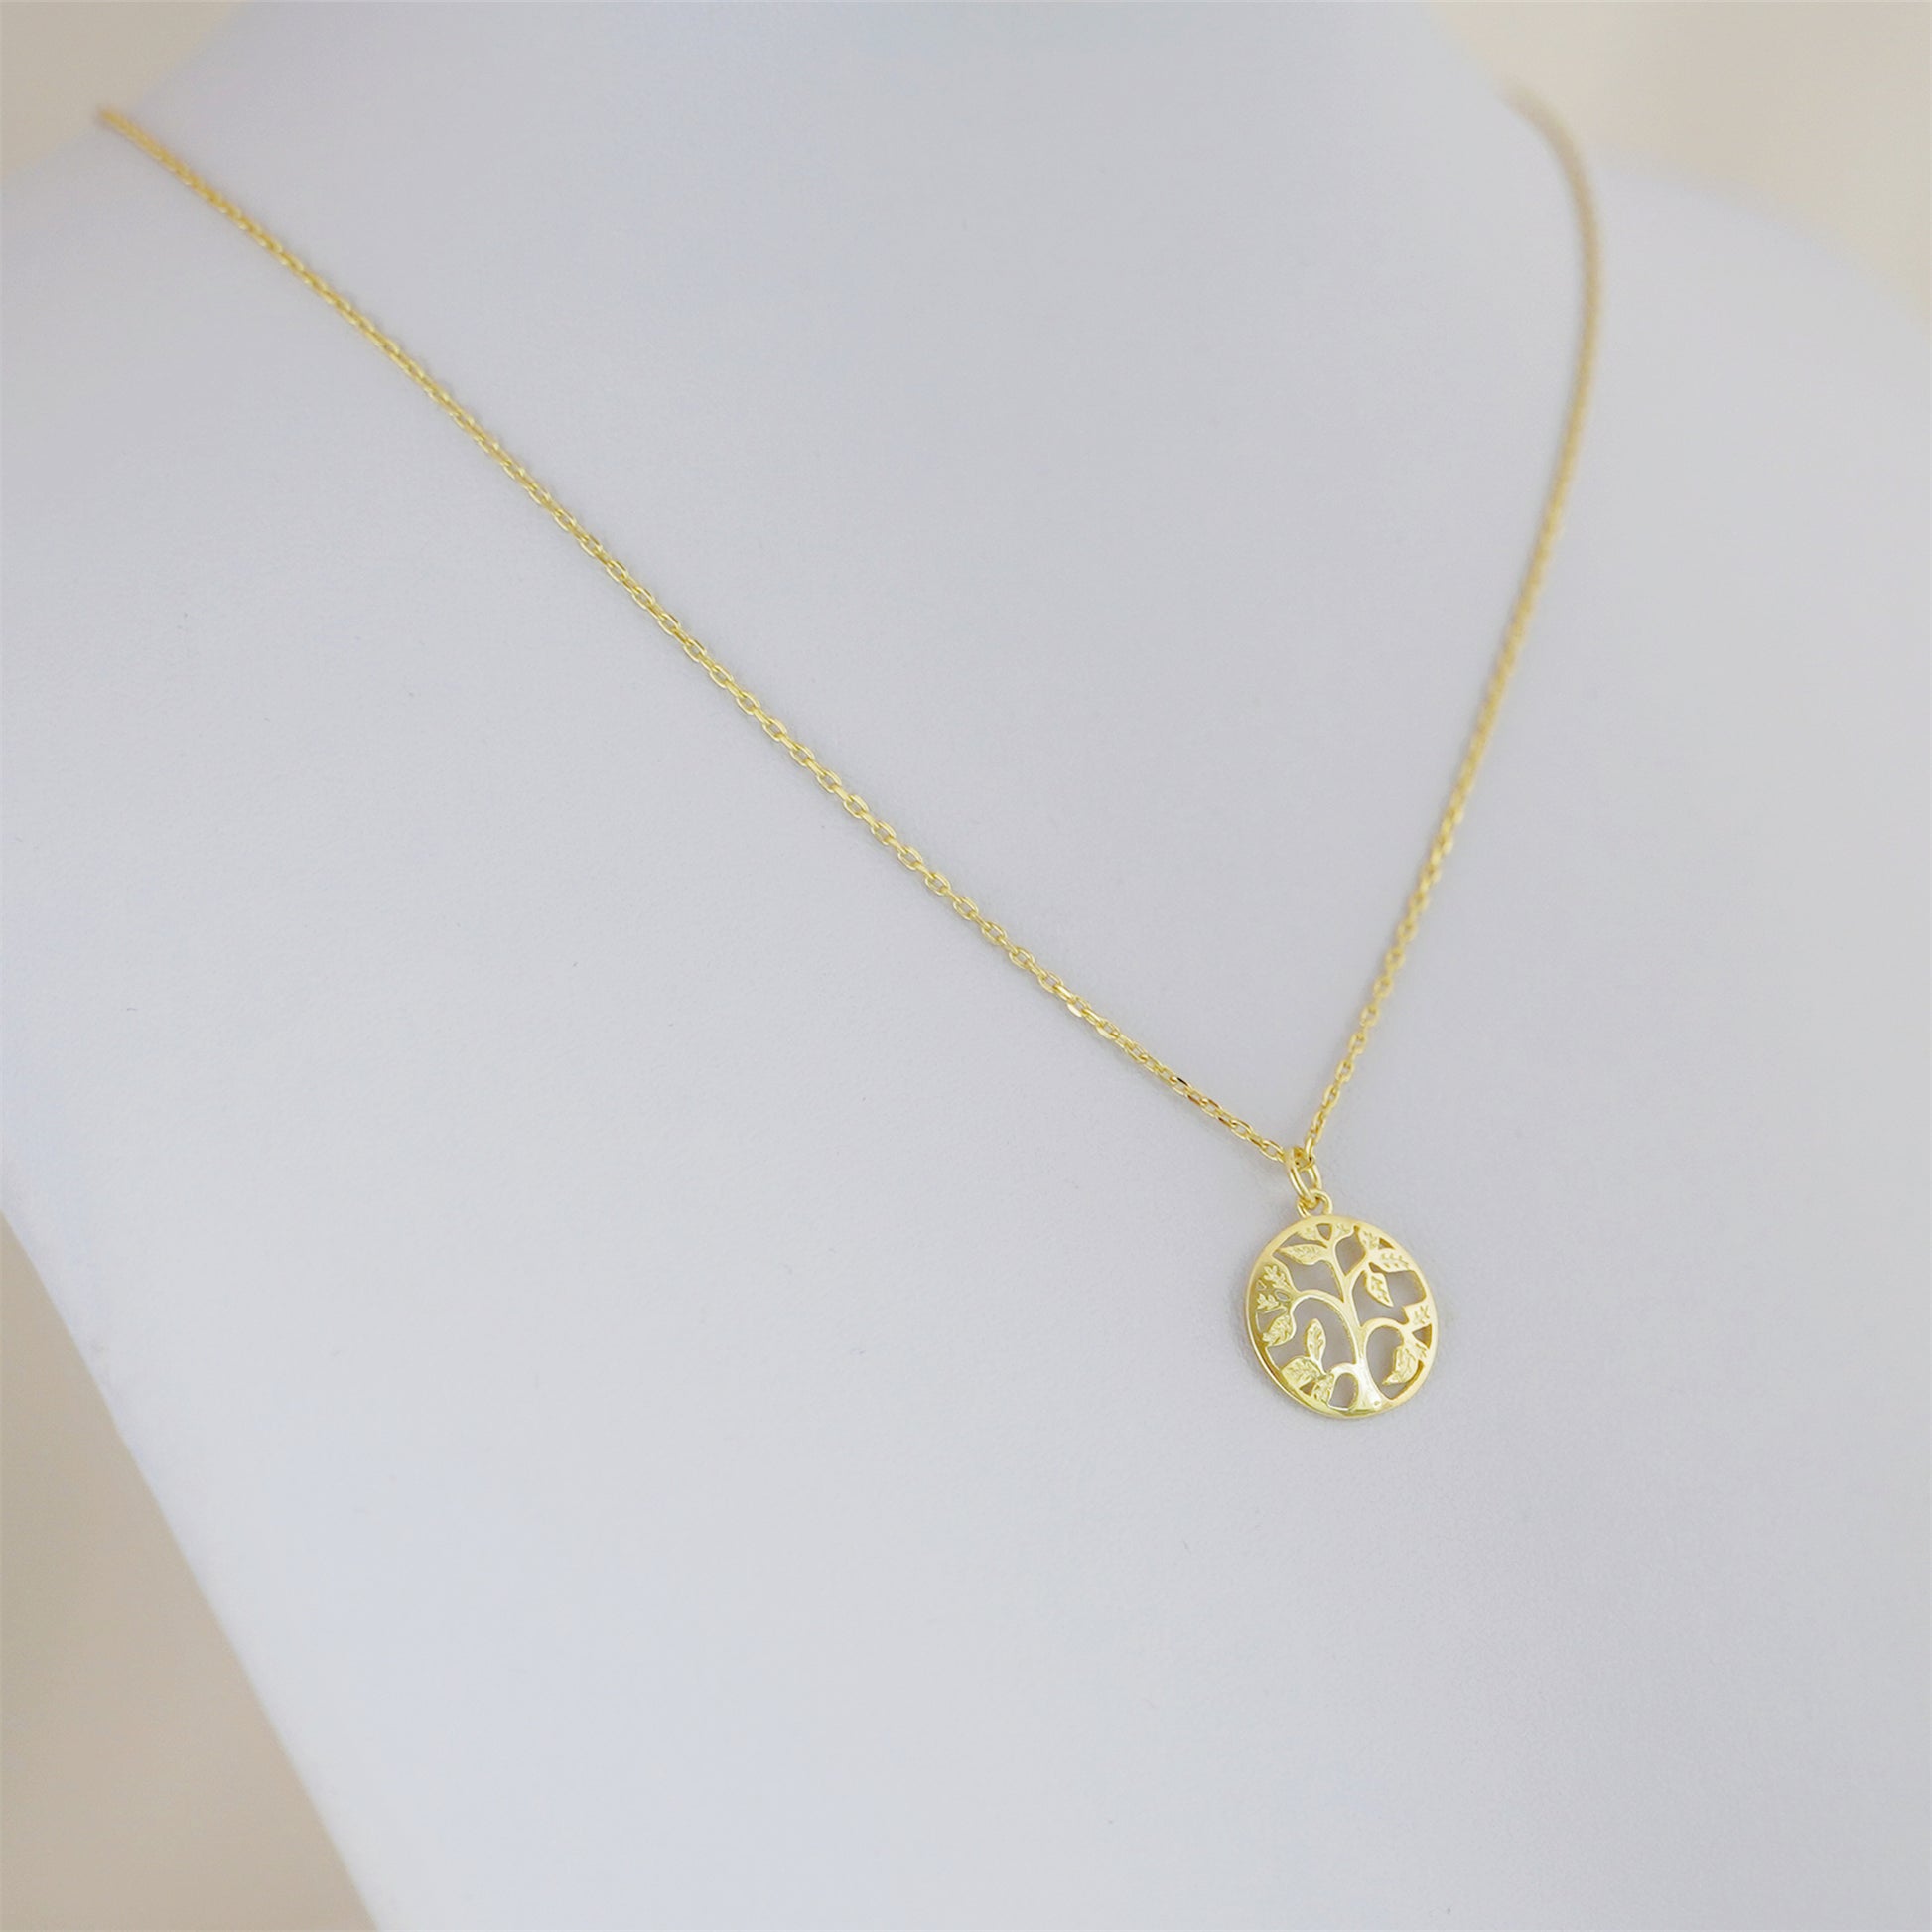 925 Sterling Silver Tree of Life Family Tree Pendant Necklace in 18K gold plated - sugarkittenlondon